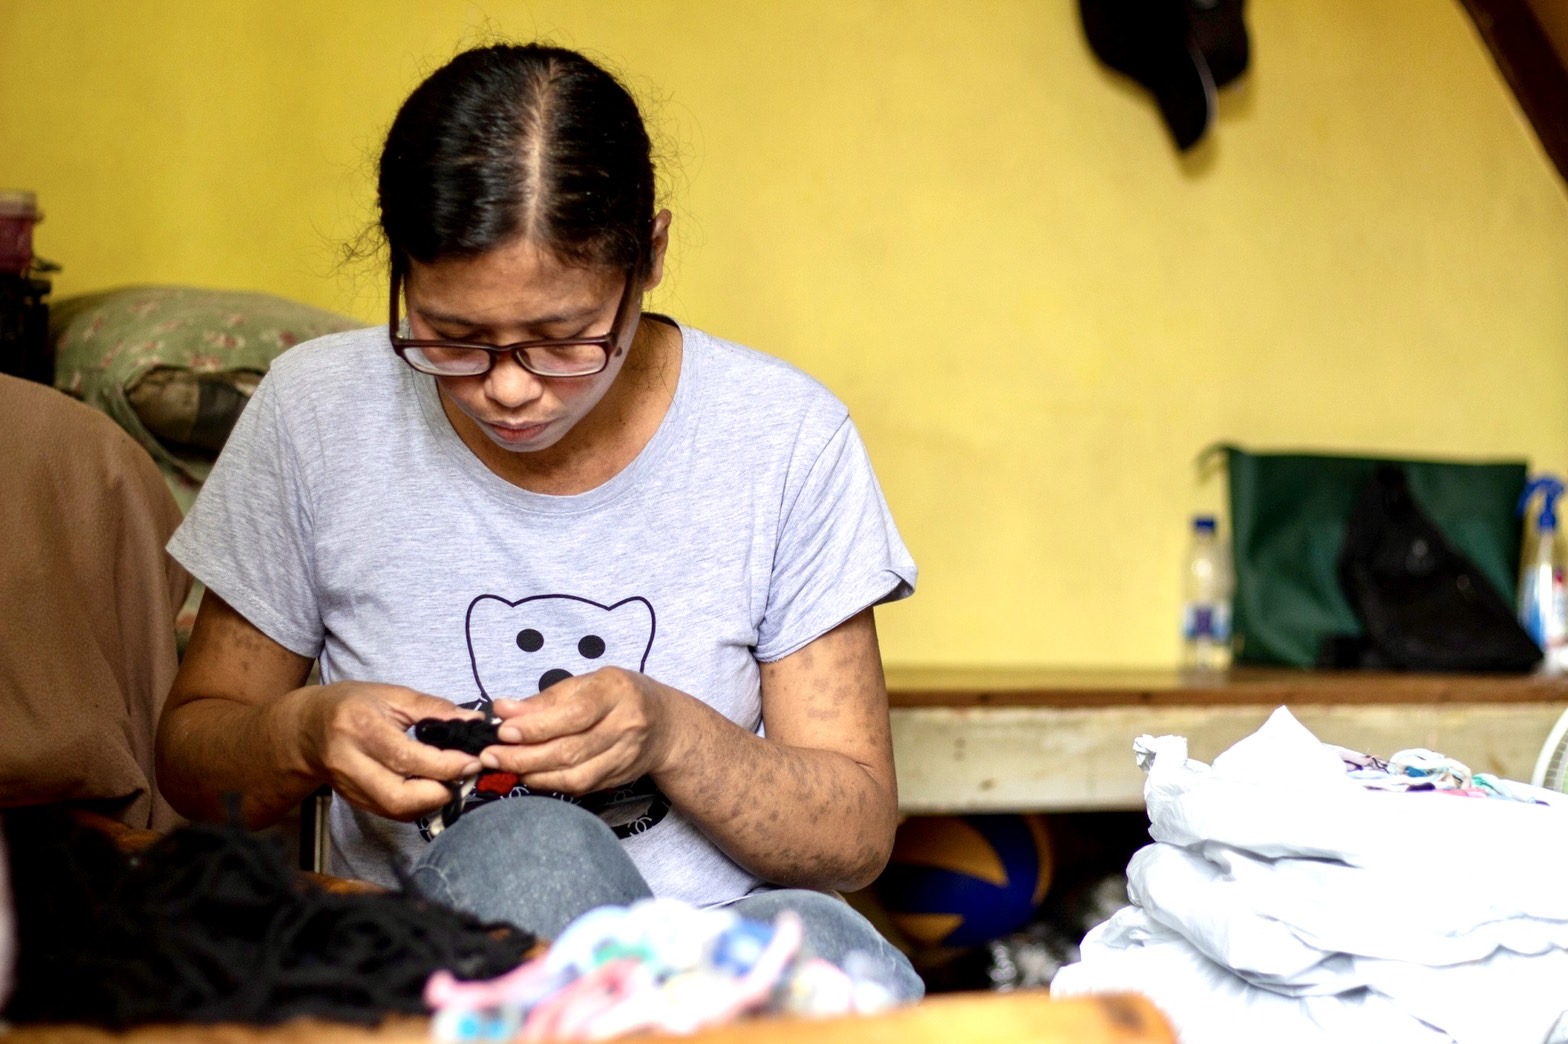 Medical beneficiary Marisol Peñaflorida has lupus. Lesions in her arms are sensitive to sun exposure, thus limiting her work options and time outdoors. Weaving mats for Tzu Chi’s livelihood program allows her to work and earn without having to leave home. 【Photo by Harold Alzaga】 